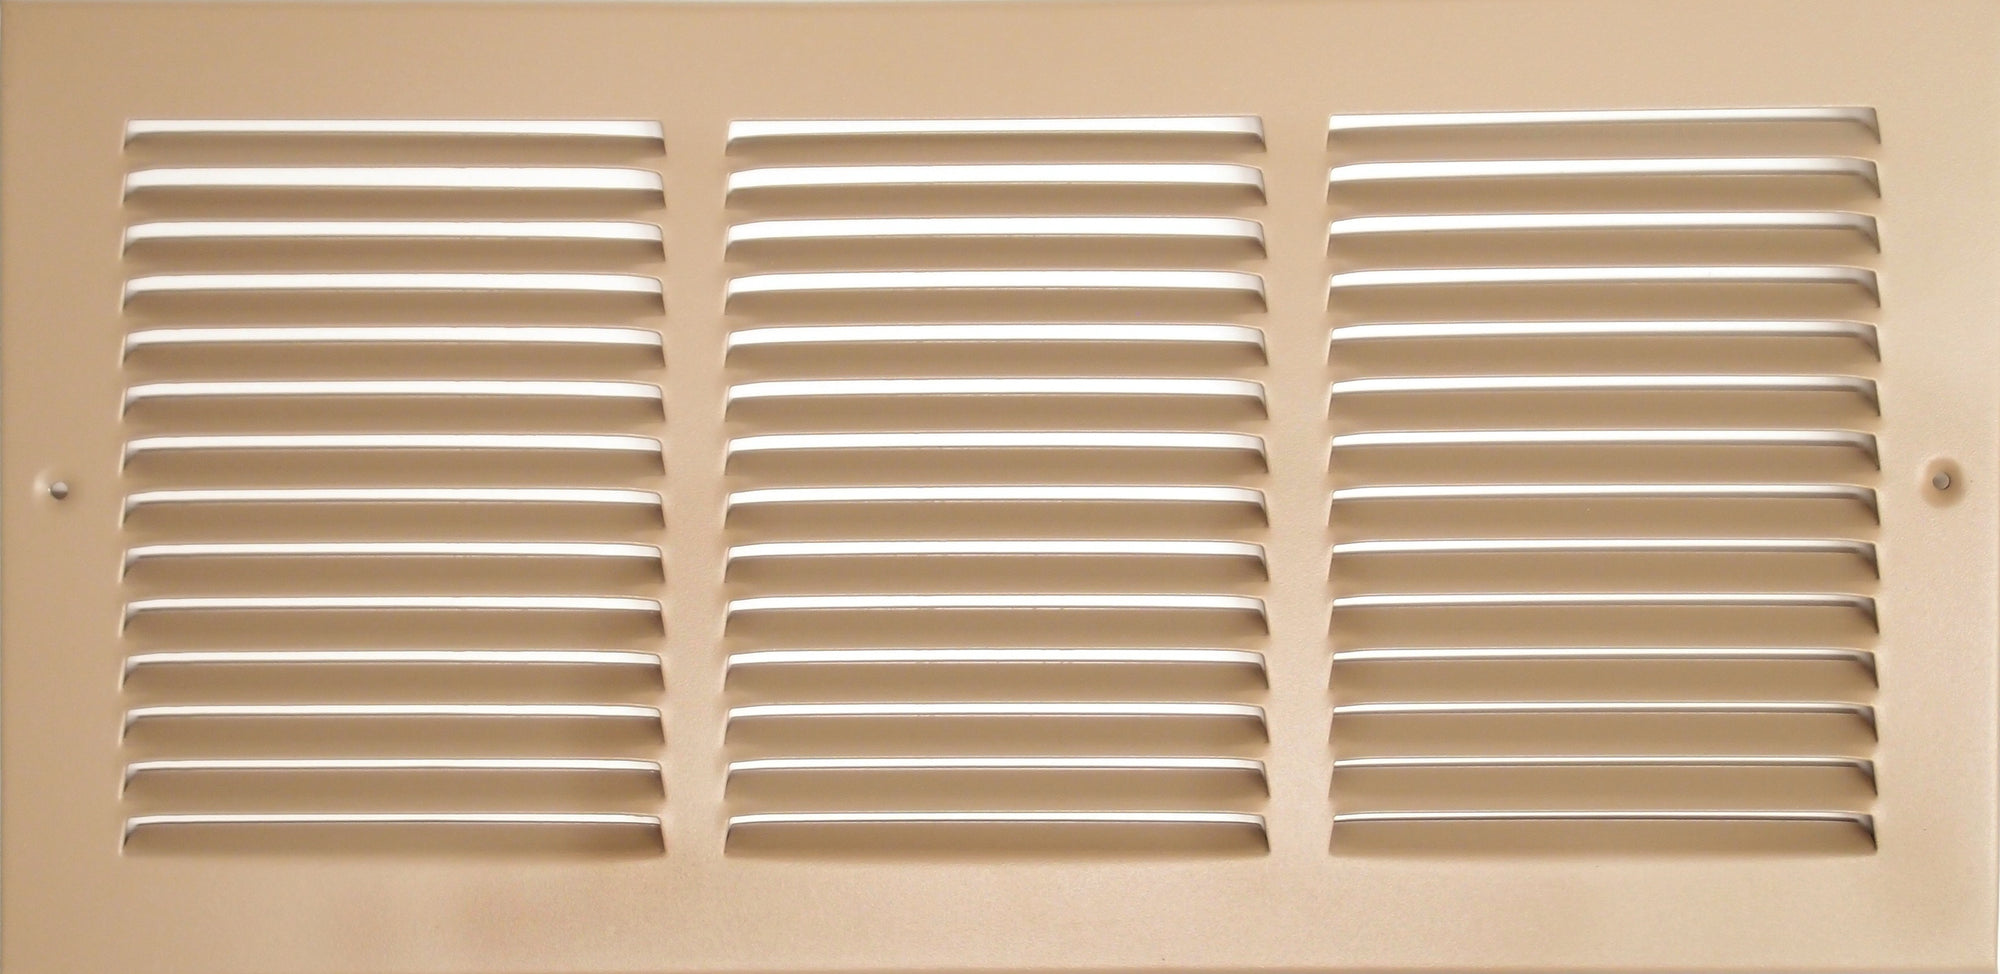 20" X 14" Air Vent Return Grilles - Sidewall and Ceiling - Steel